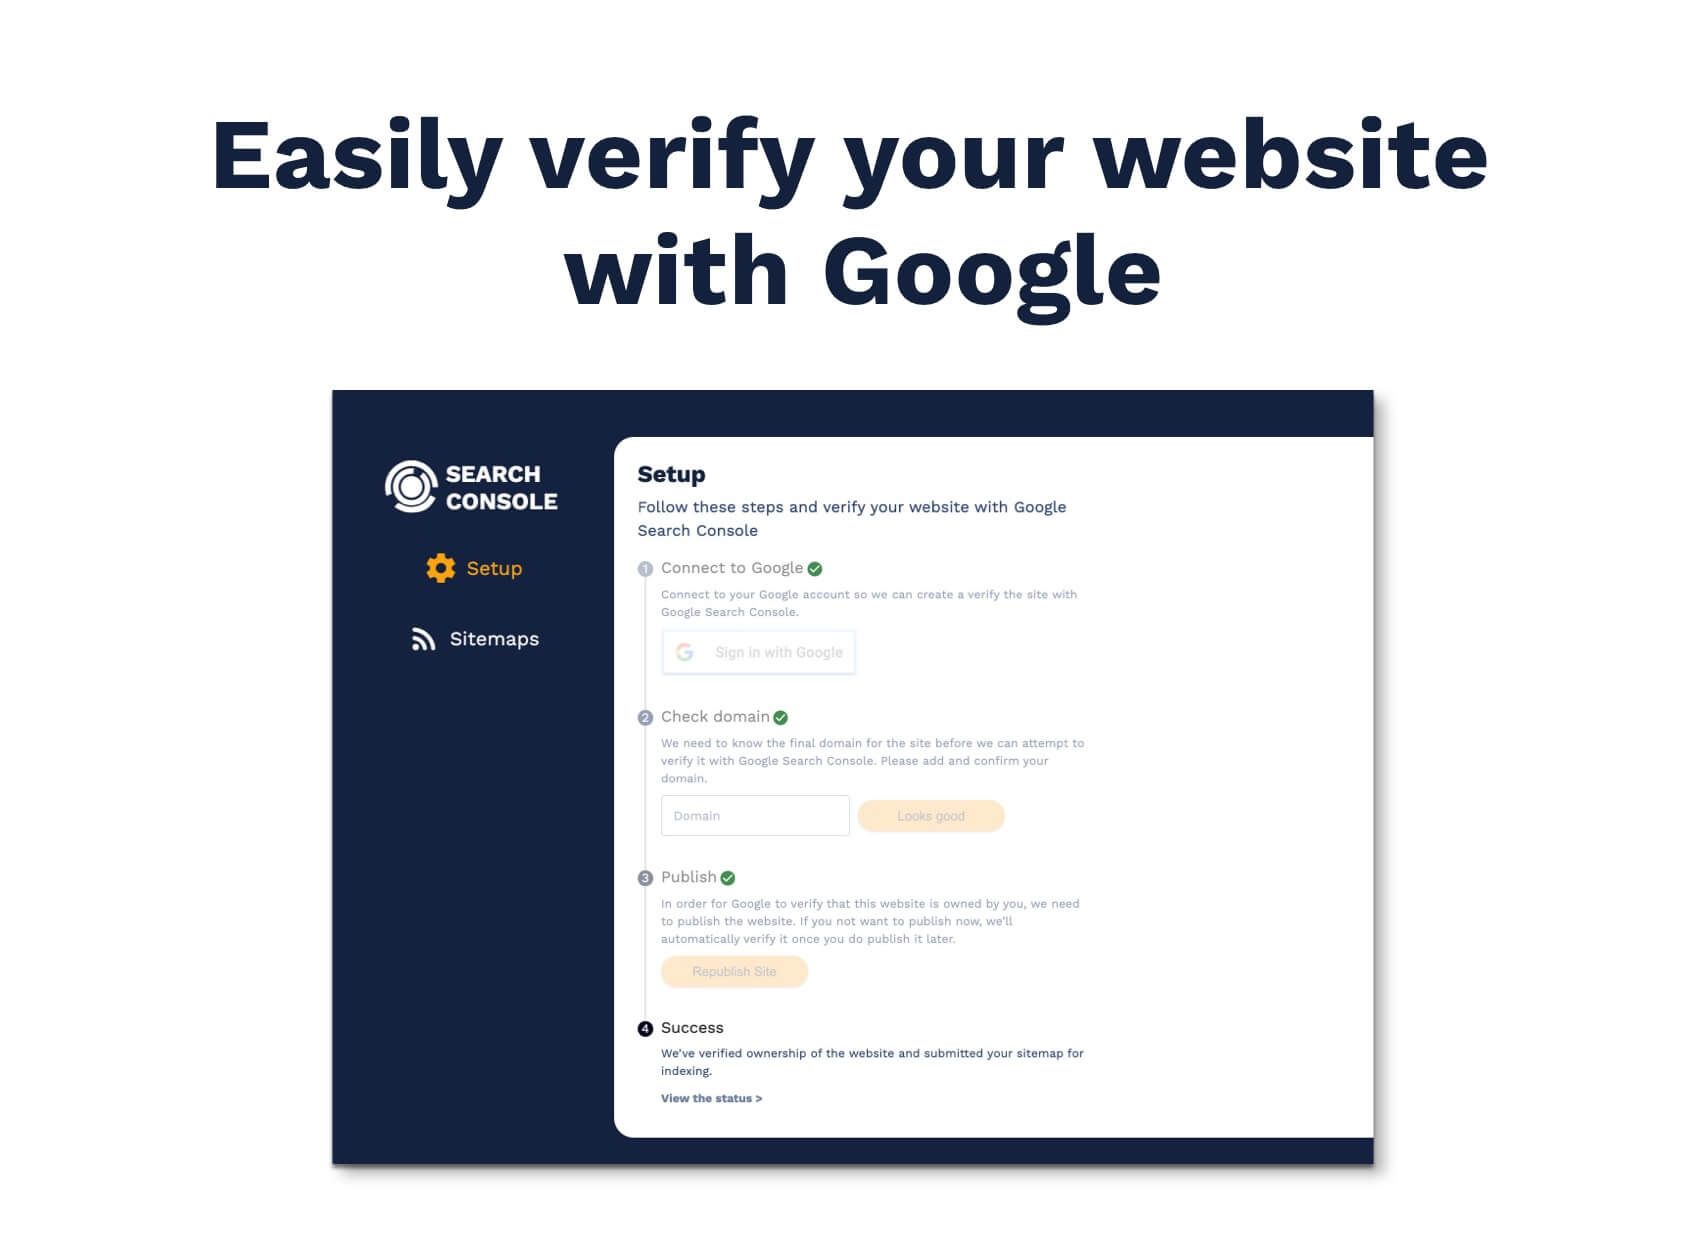 Verify the domain final domain of the website you plan to use